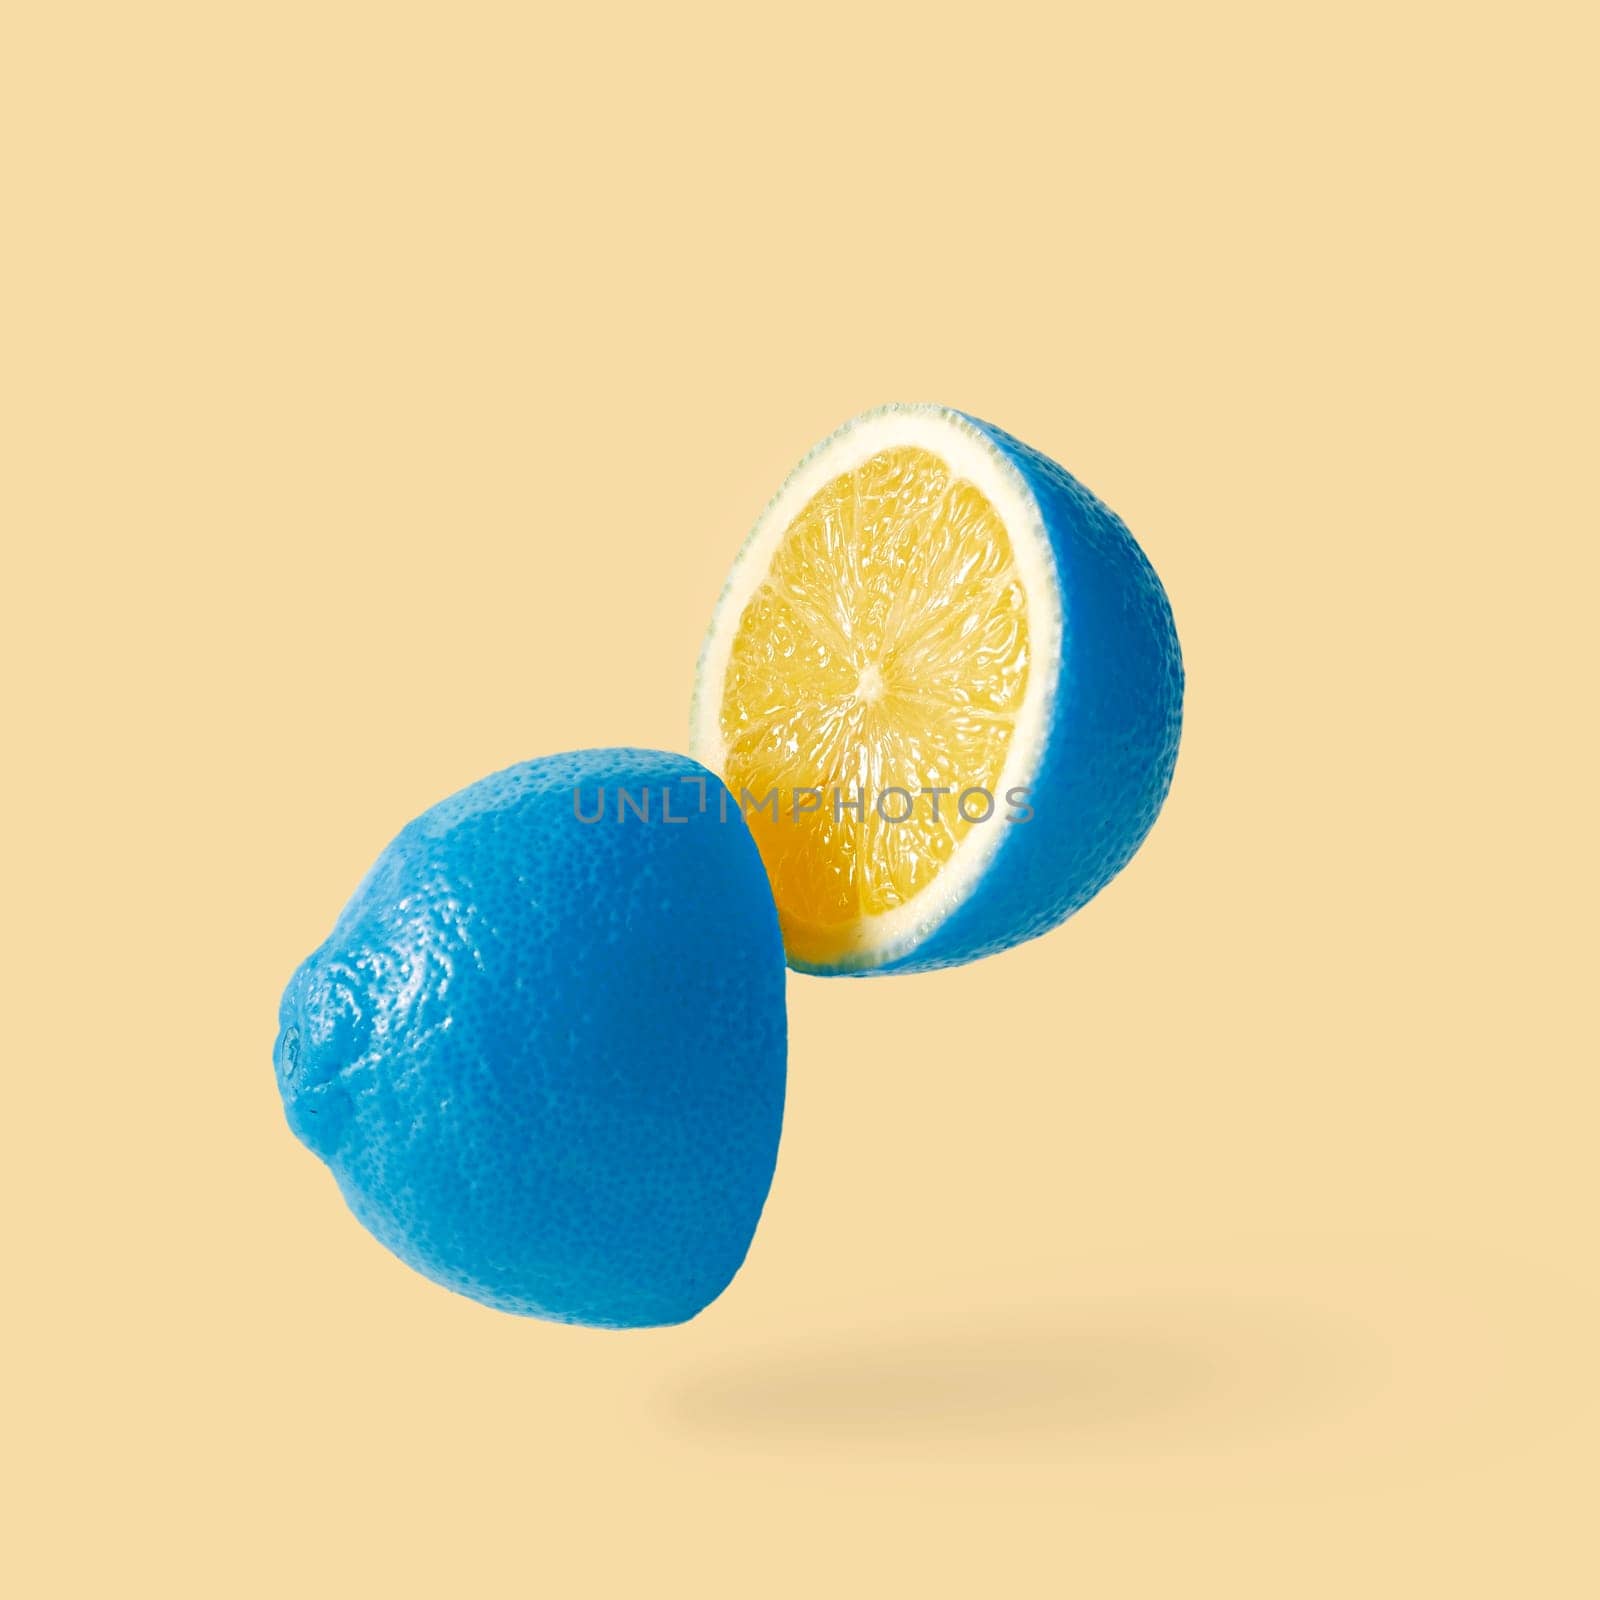 Lemon sureal playful with a blue skin cut into two parts levitation above the background. by sergii_gnatiuk